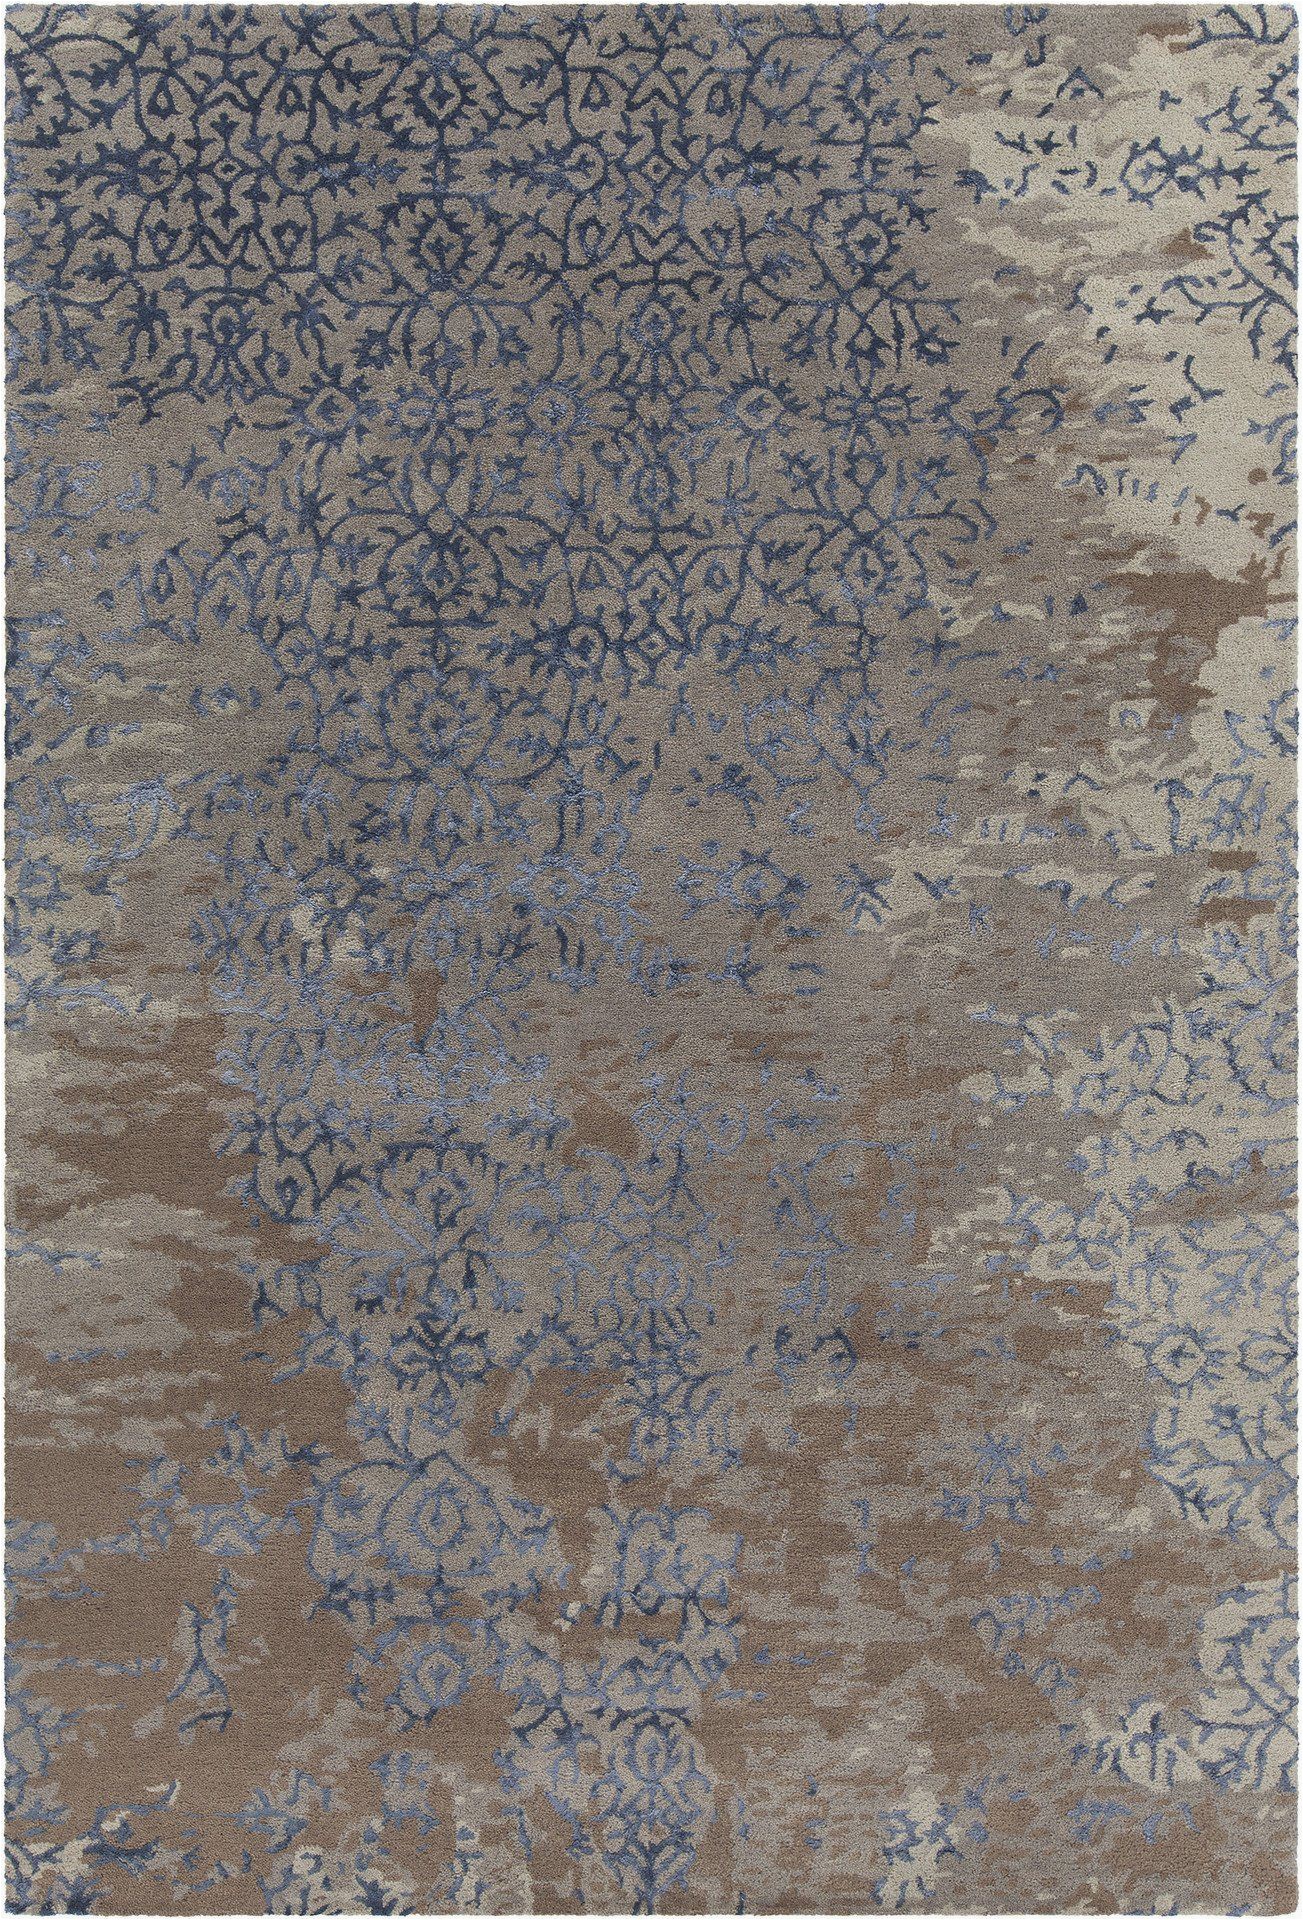 Area Rugs with Blue and Browns Rupec Collection Hand Tufted area Rug In Grey Blue & Brown